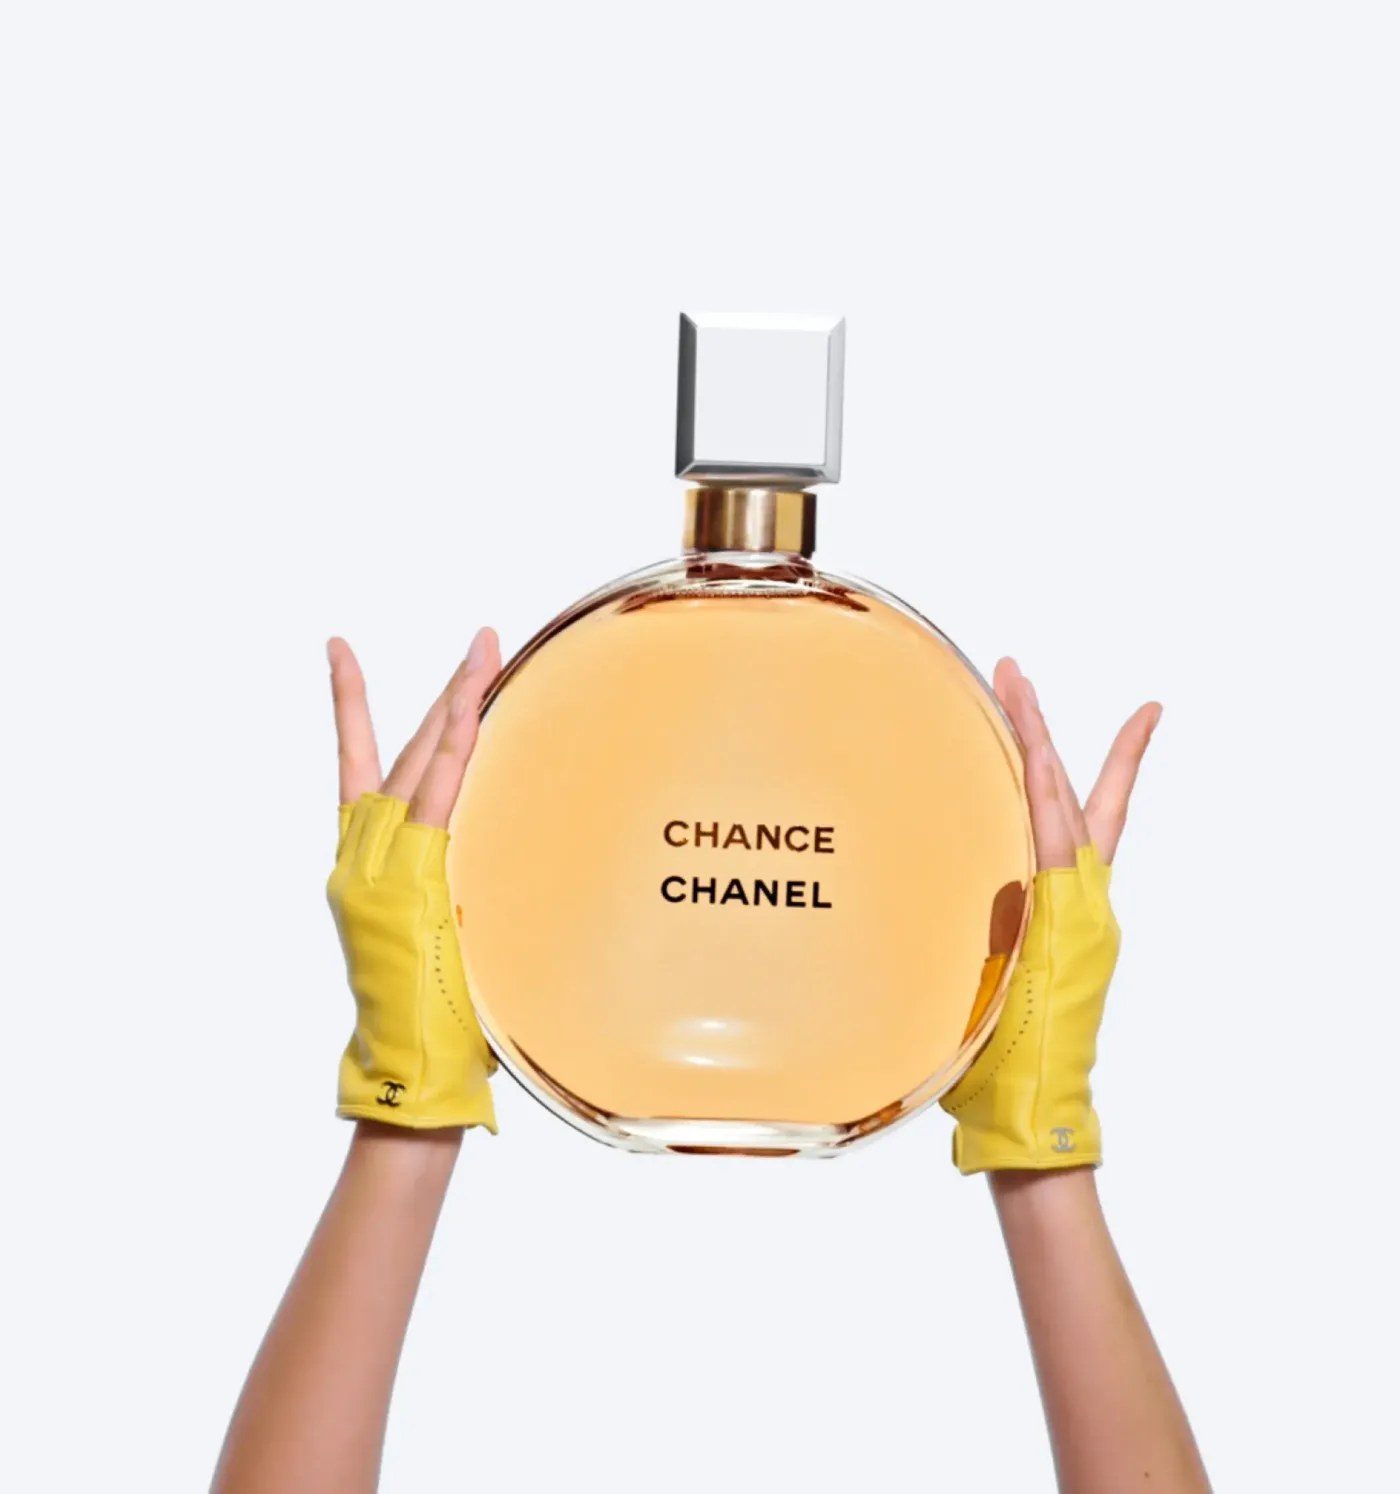 Chanel Chance EDP: The Fragrance of a Florist's Showroom, Weighed